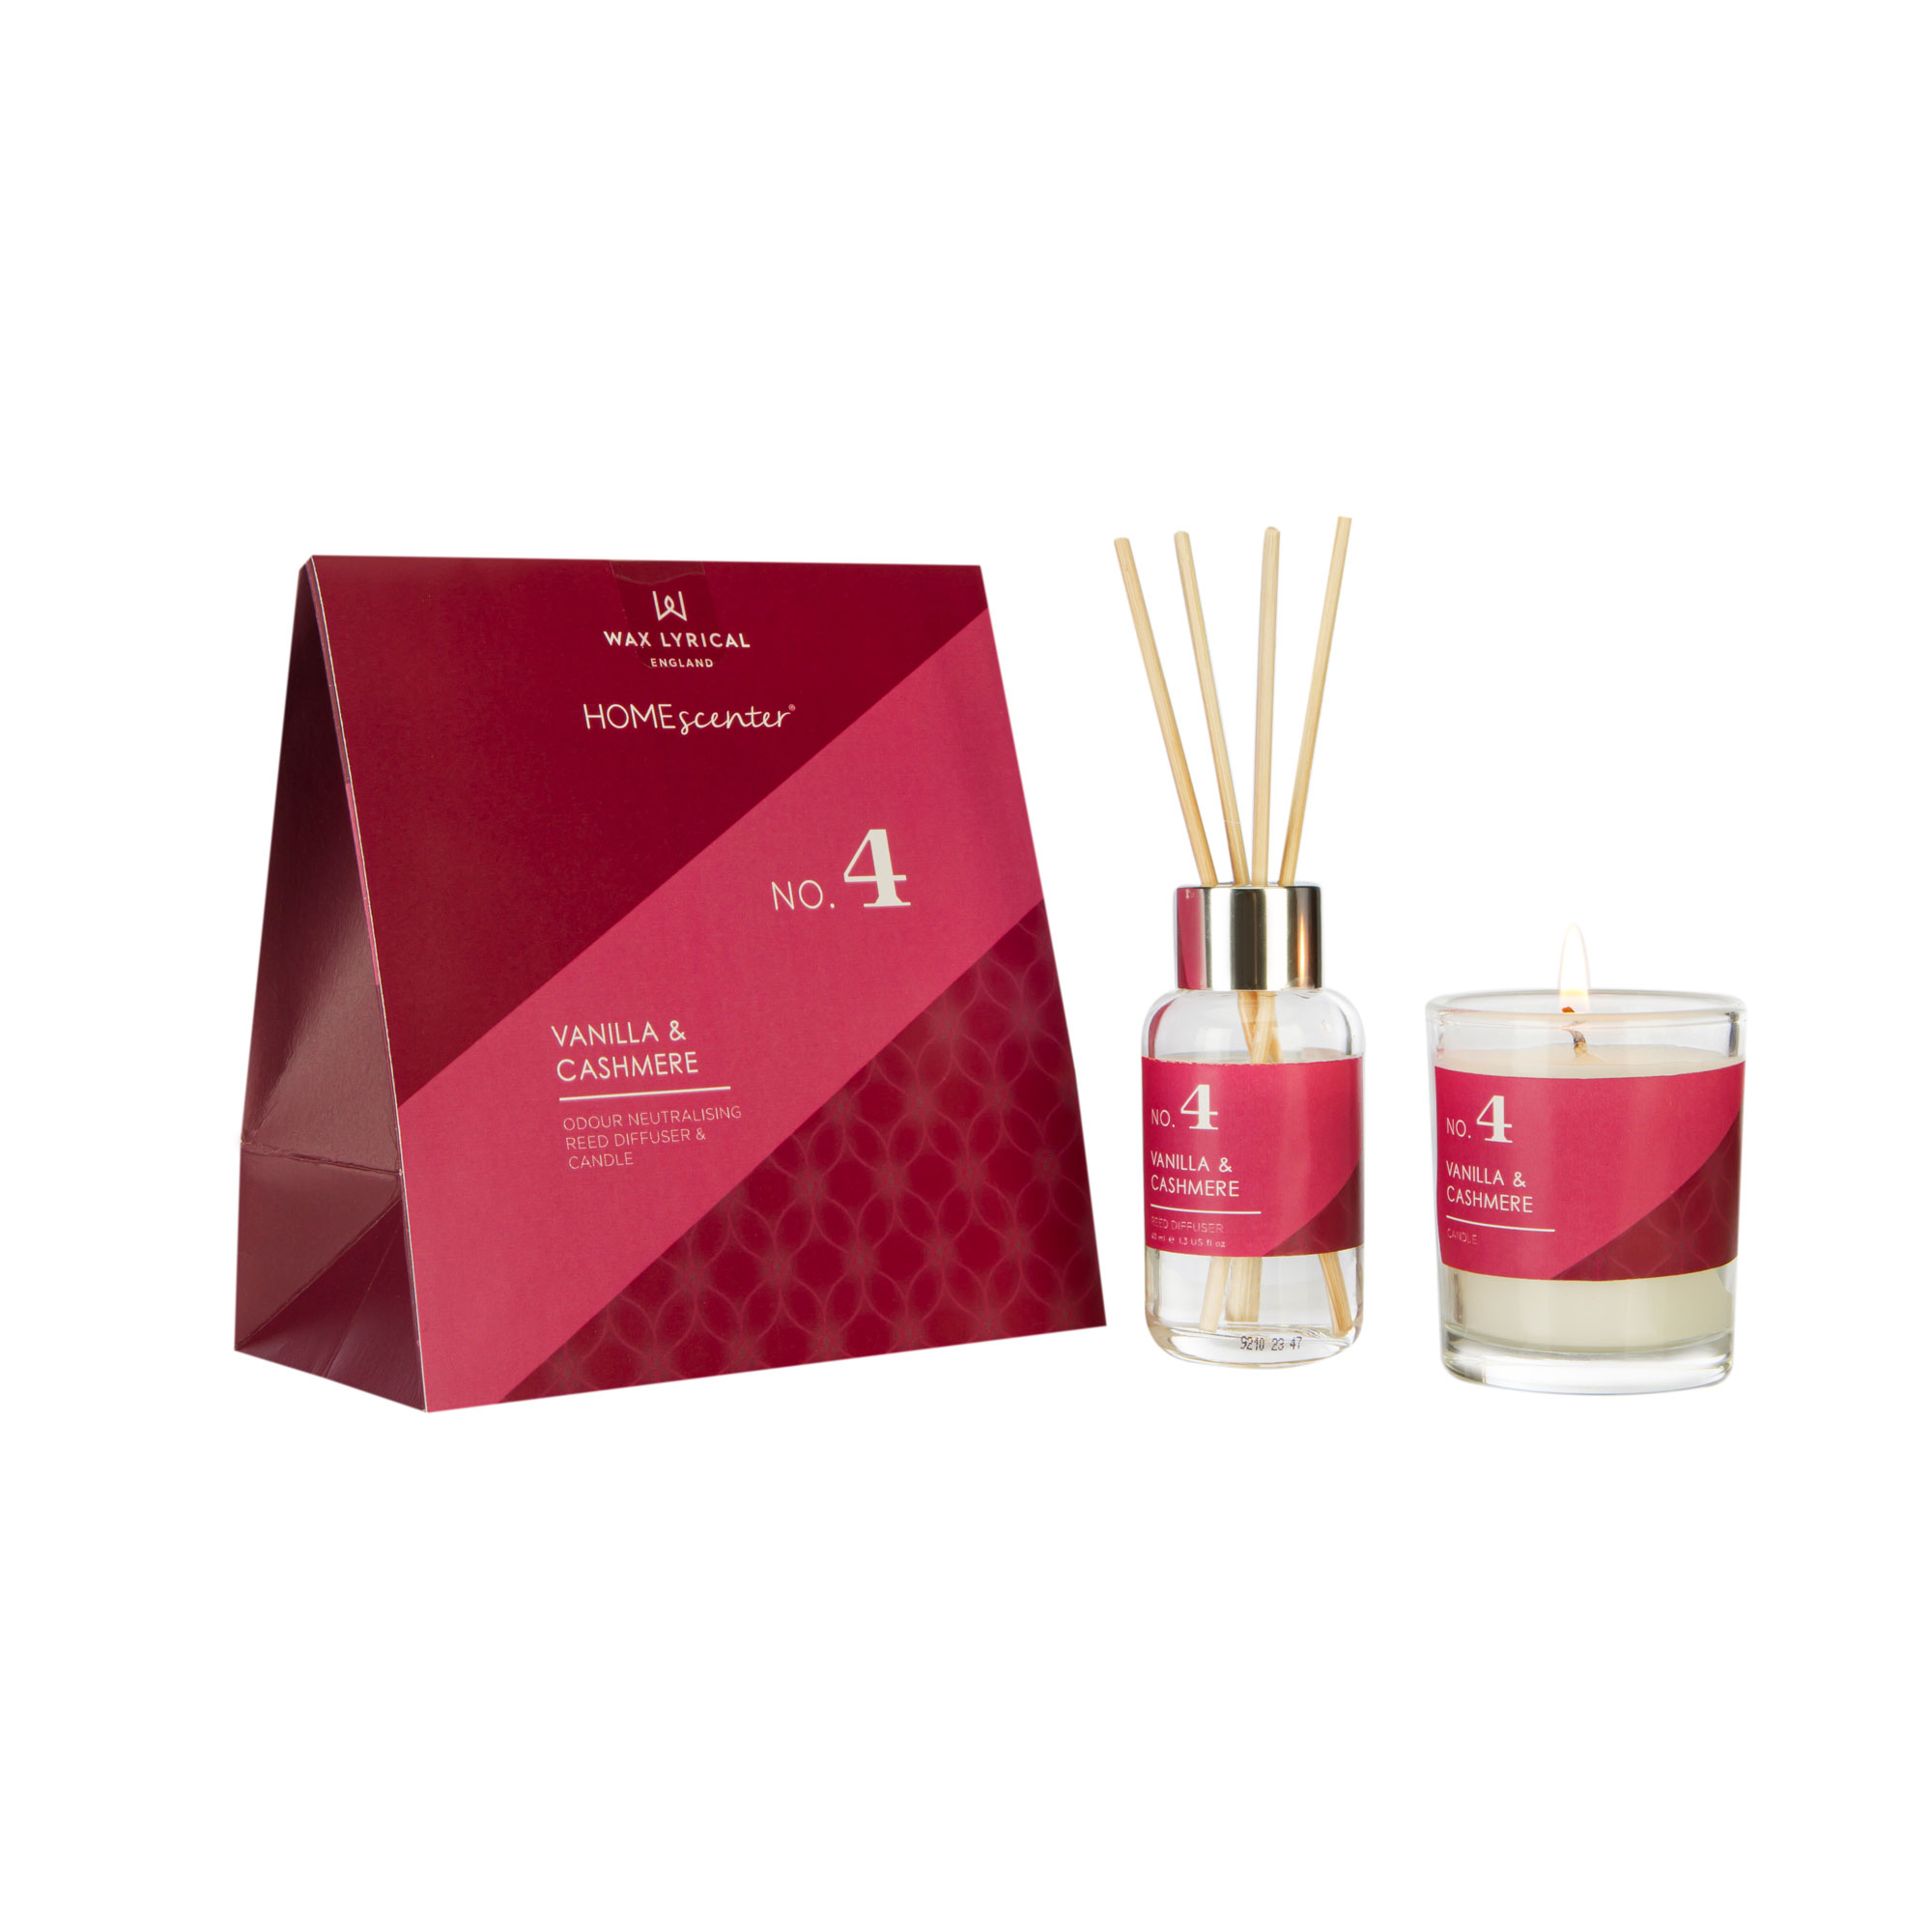 Wax Lyrical Homescenter No. 1 Water Lily & Lilac Reed Diffuser and Candle  Gift Set